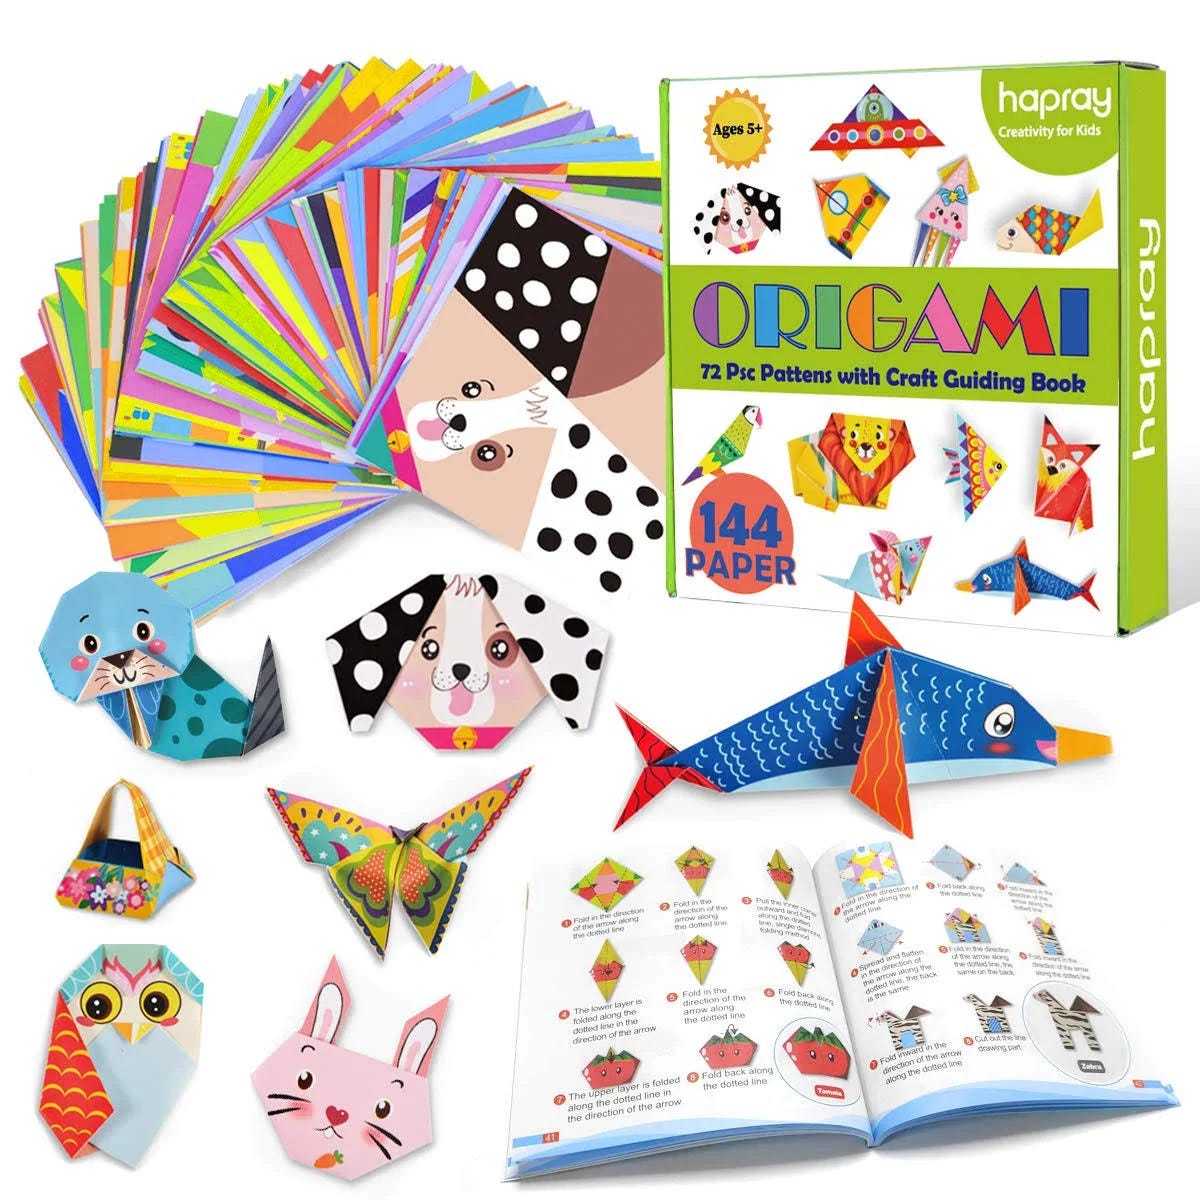 hapray Origami Paper for Kids: 144 Sheets with 72 Patterns and Craft Guidebook | Image